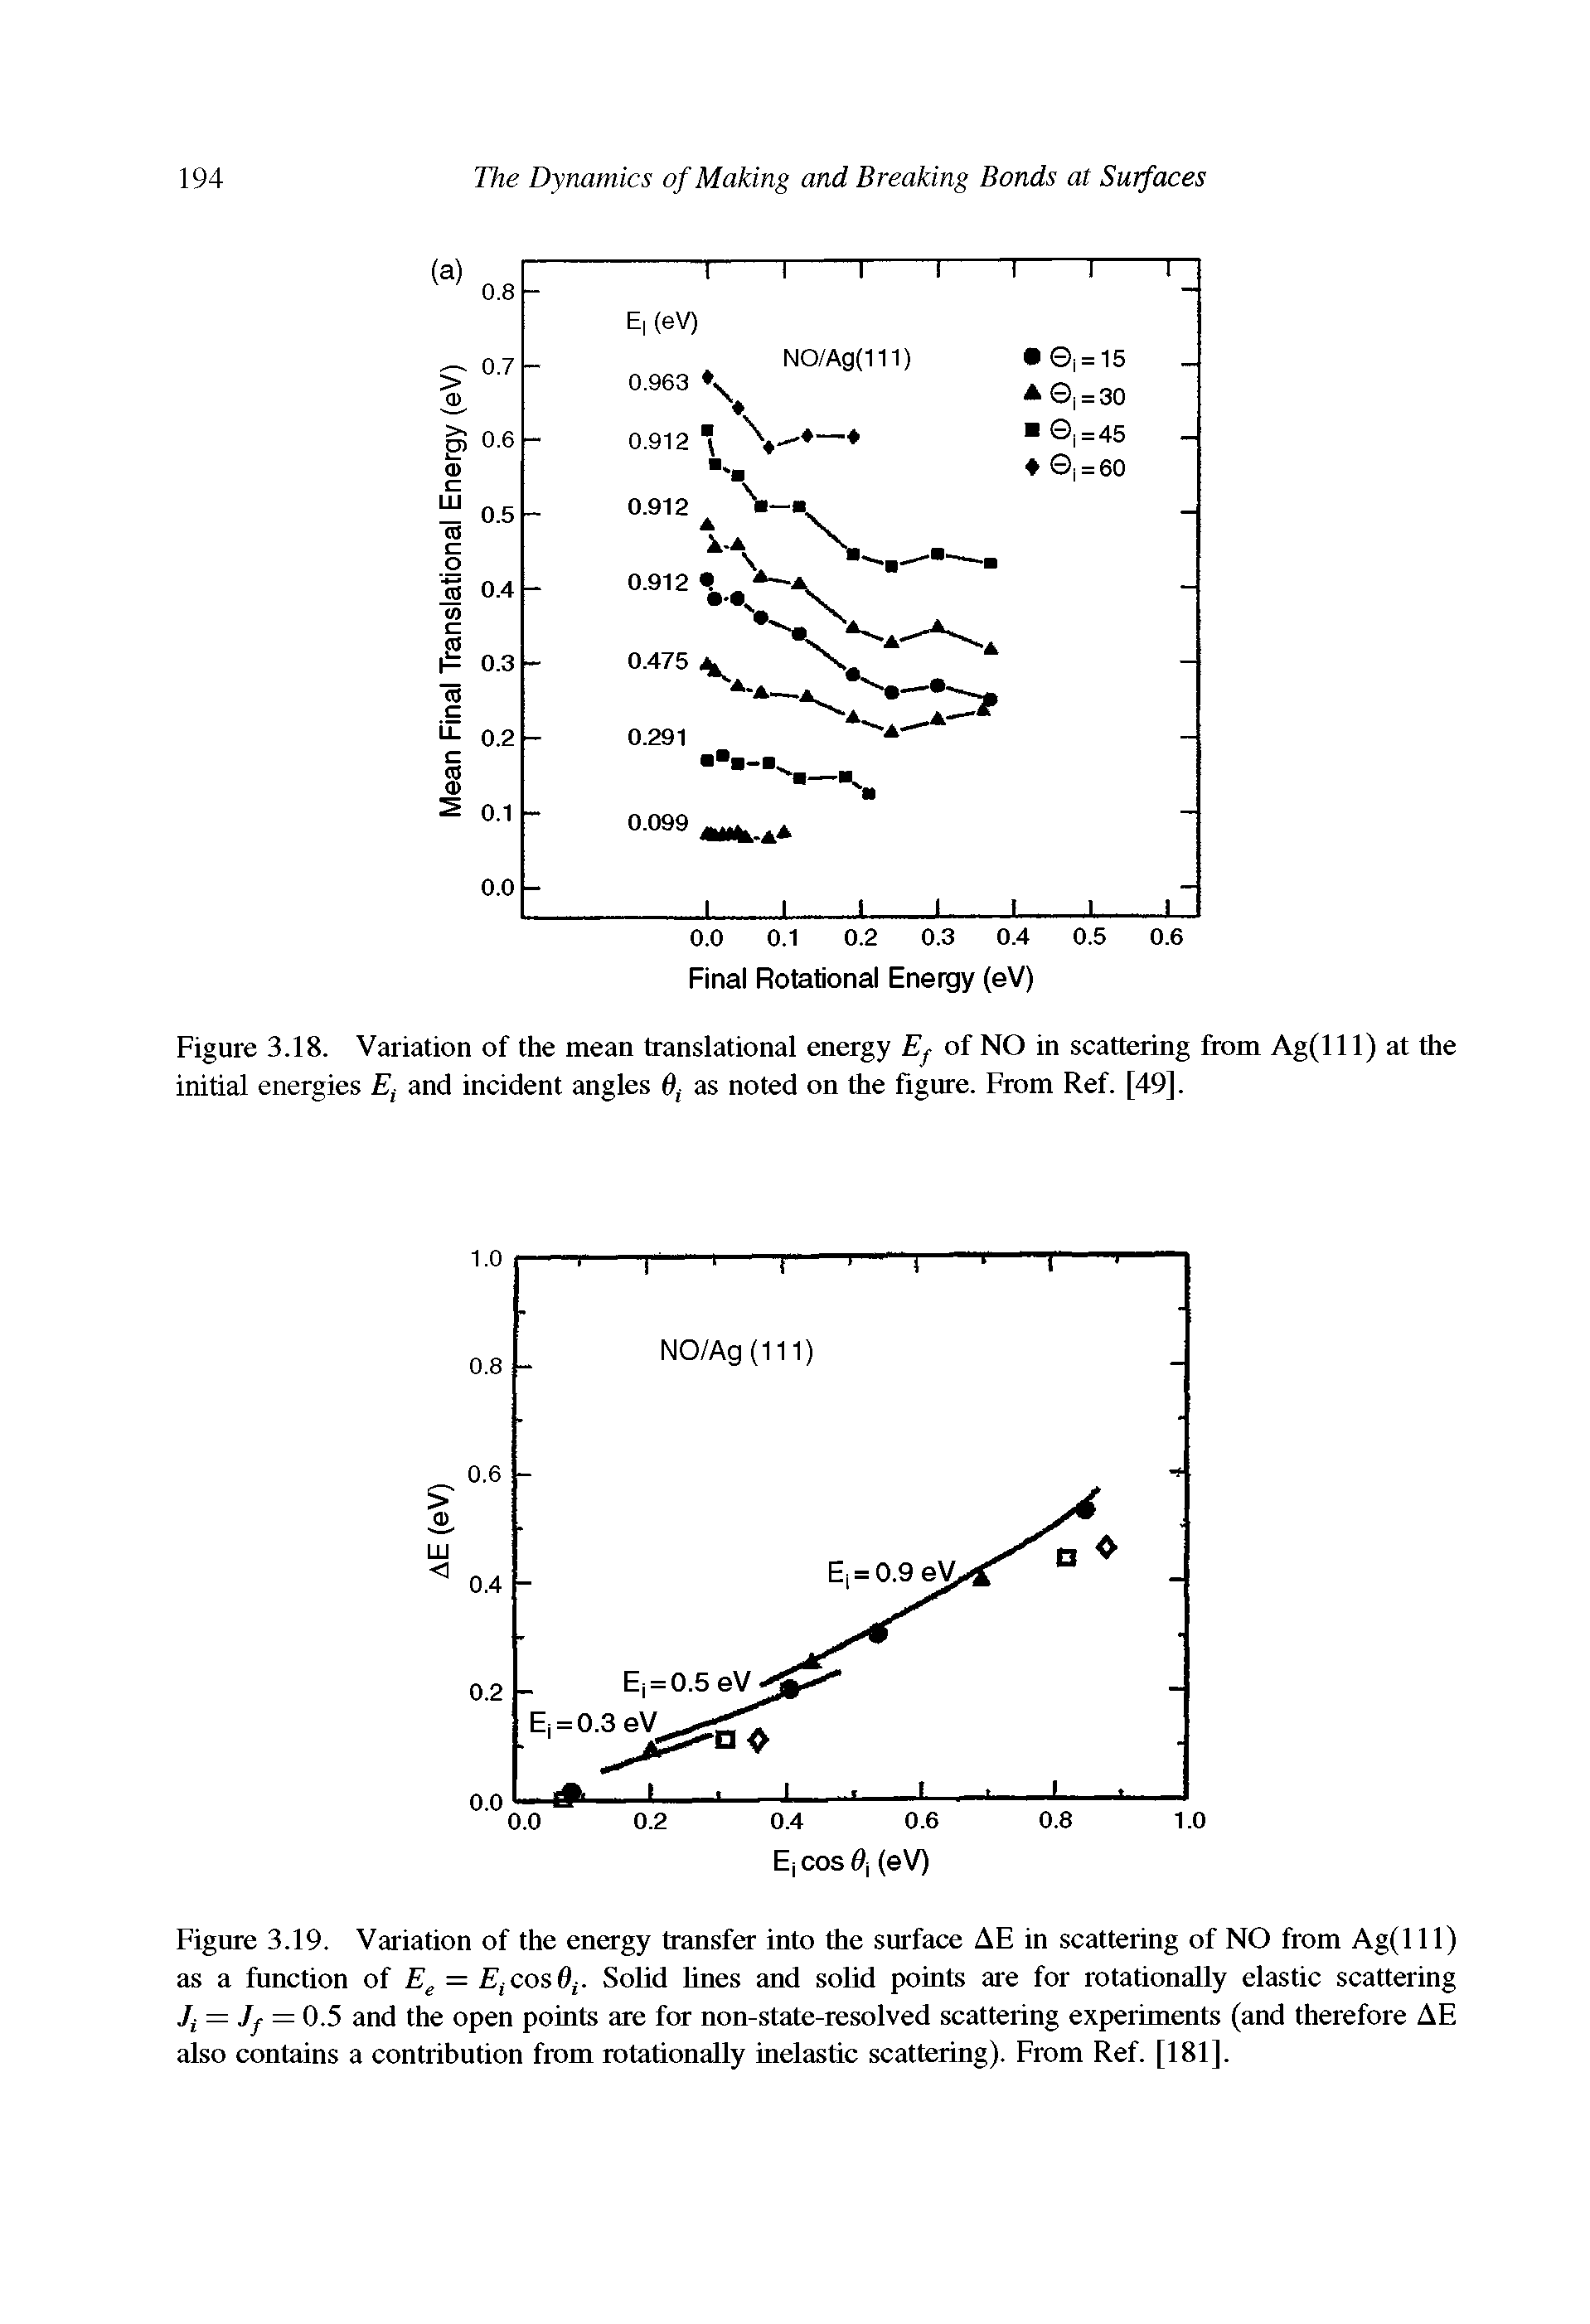 Figure 3.19. Variation of the energy transfer into the surface in scattering of NO from Ag(l 11) as a function of Ee = f ccsO,-. Solid lines and solid points are for rotationally elastic scattering. /, = Jj = 0.5 and the open points are for non-state-resolved scattering experiments (and therefore also contains a contribution from rotationally inelastic scattering). From Ref. [181].